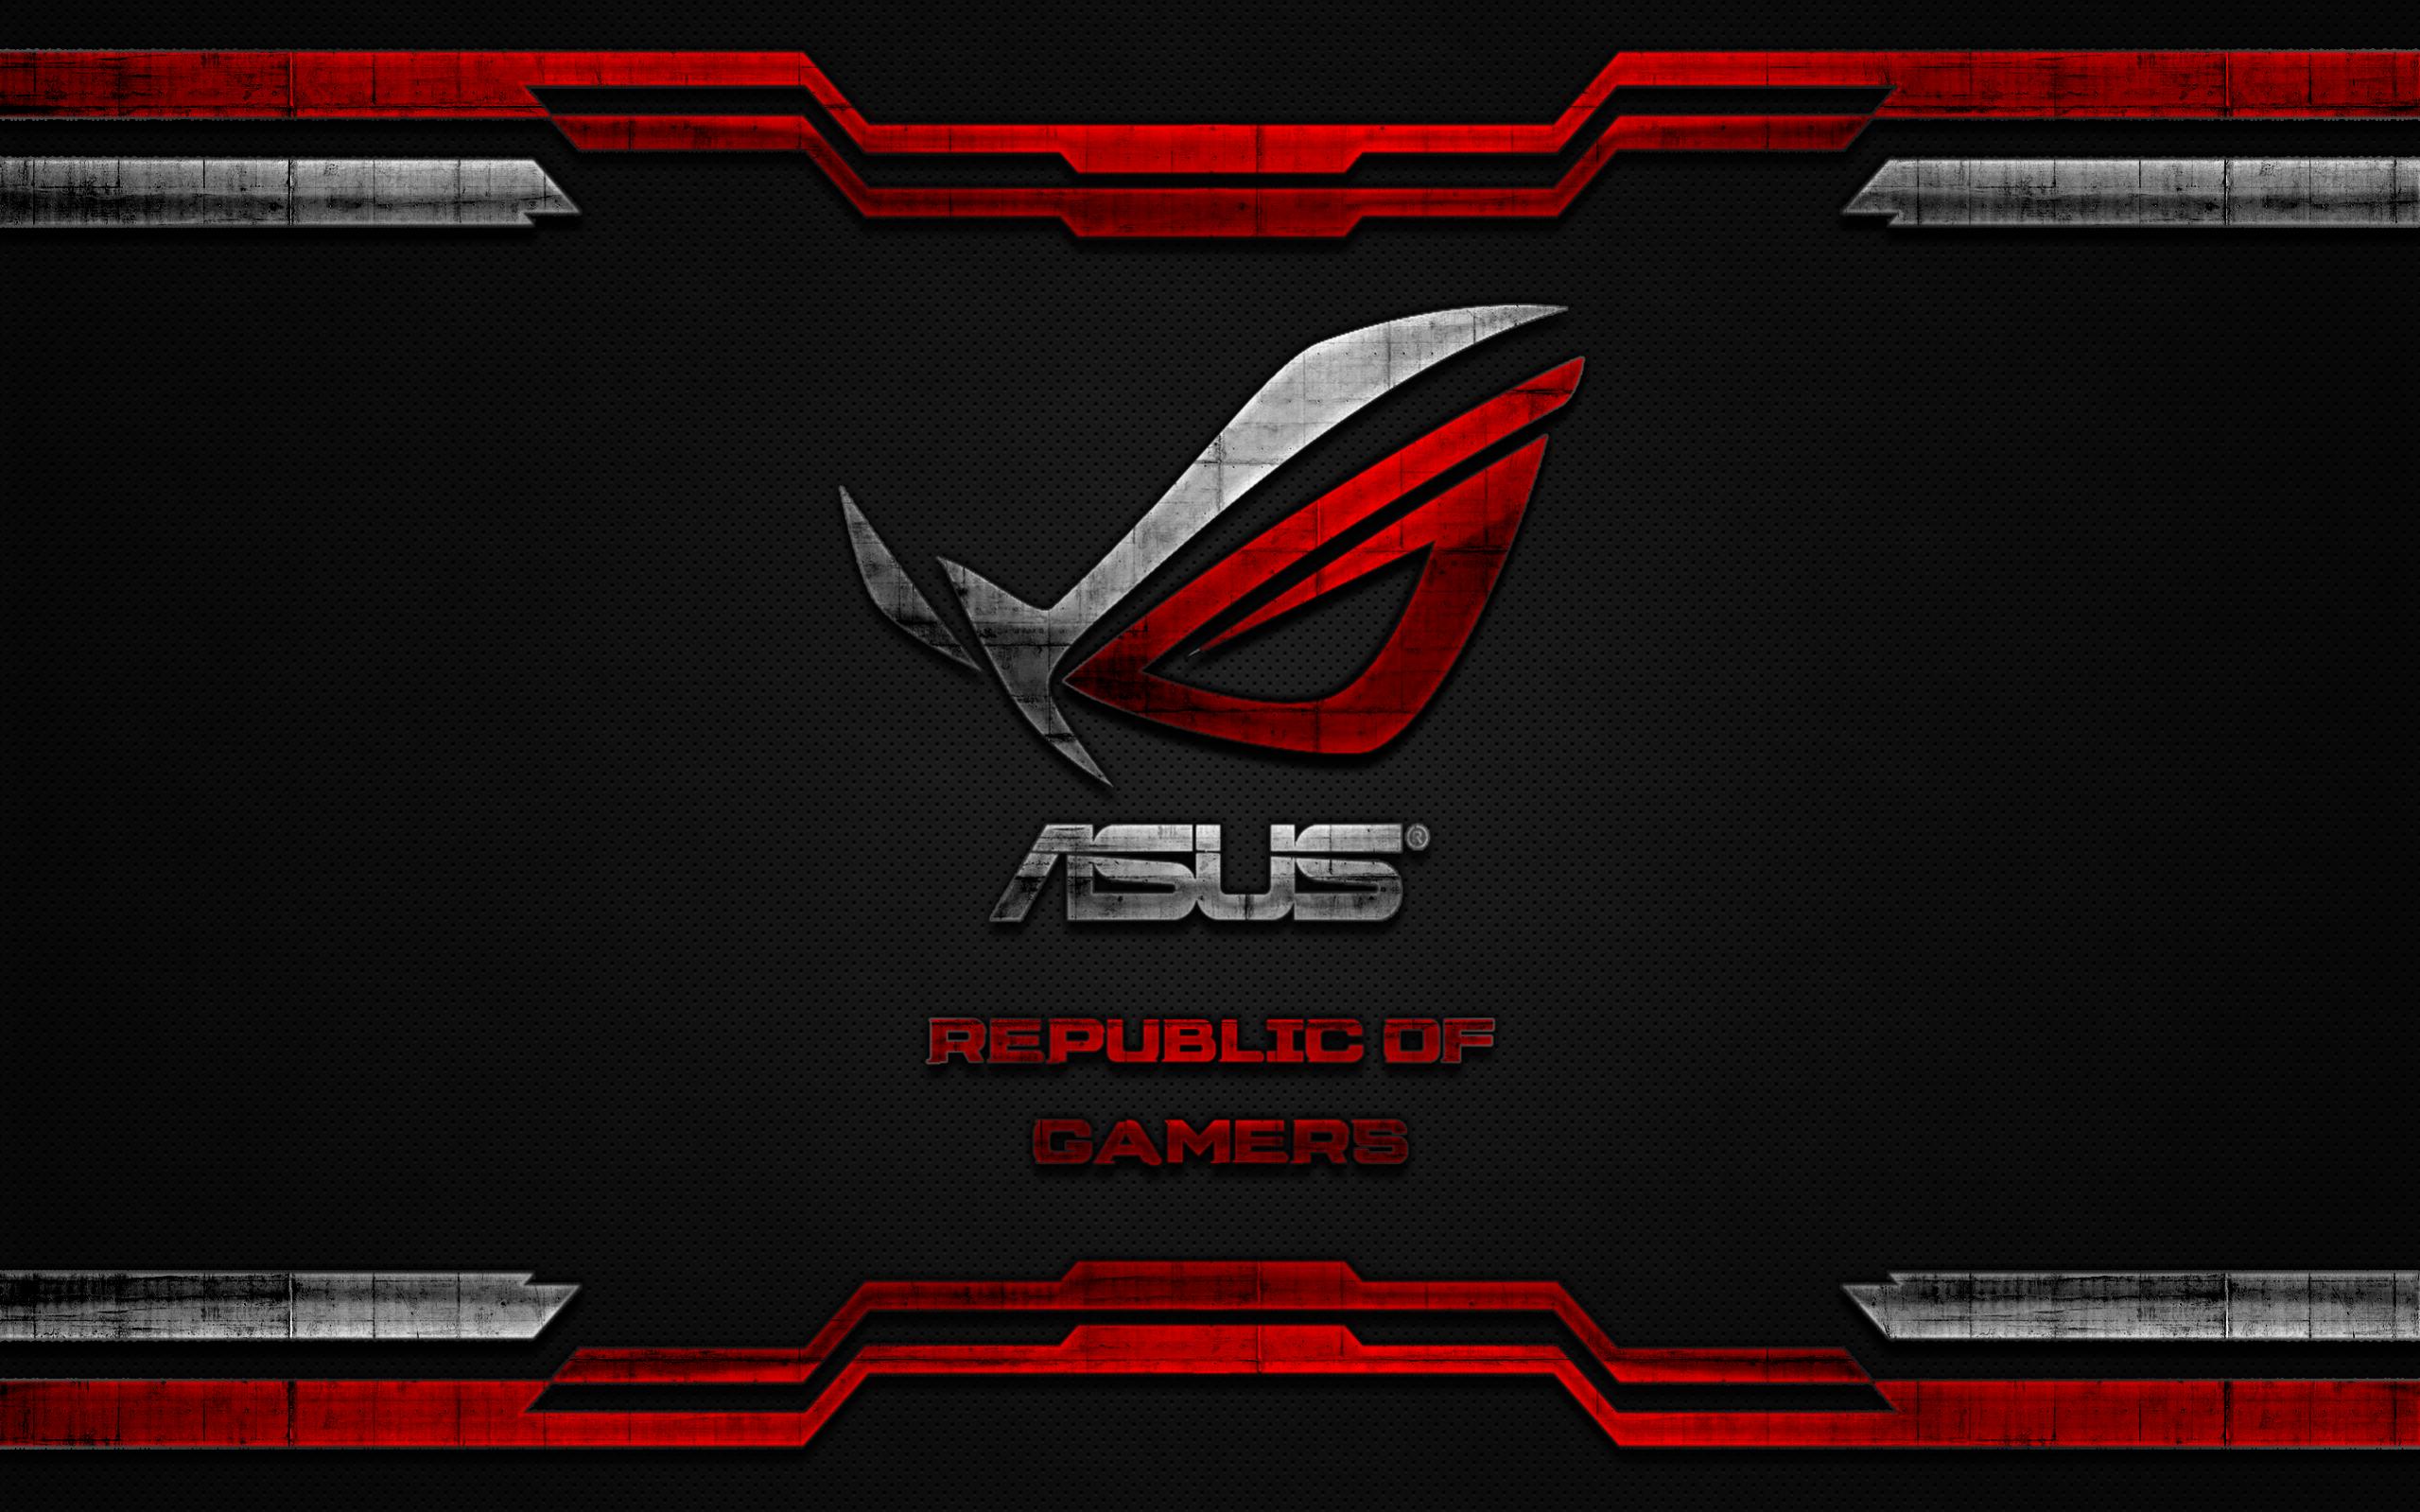 Rog Wallpaper Collection 2013 - Republic Of Gamers - HD Wallpaper 